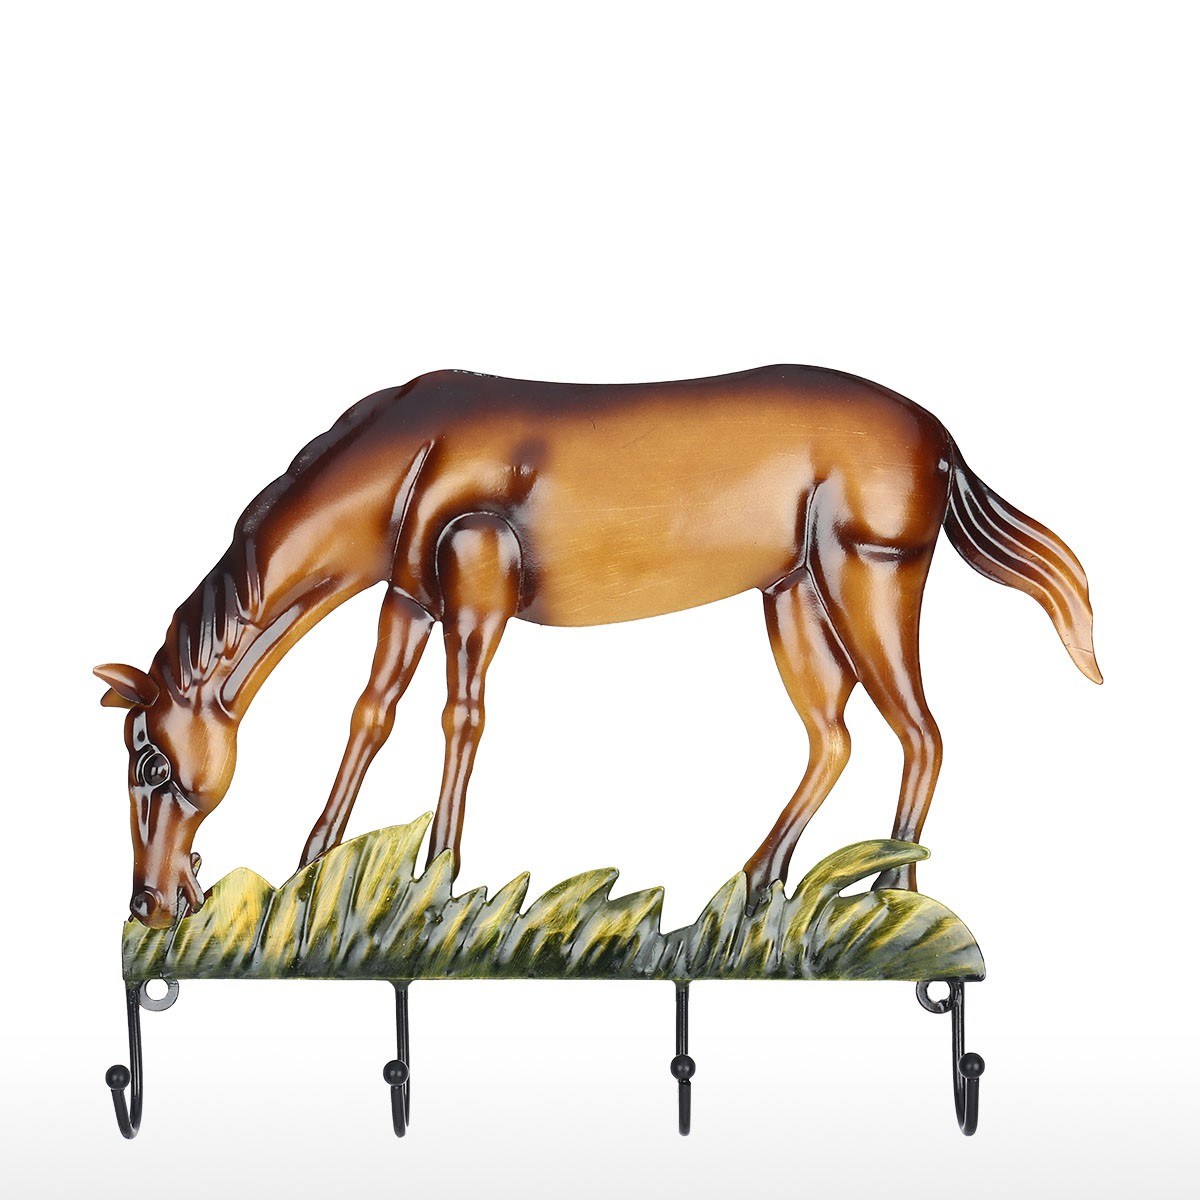 Let the horse themed wall hook take care of your organizational needs today